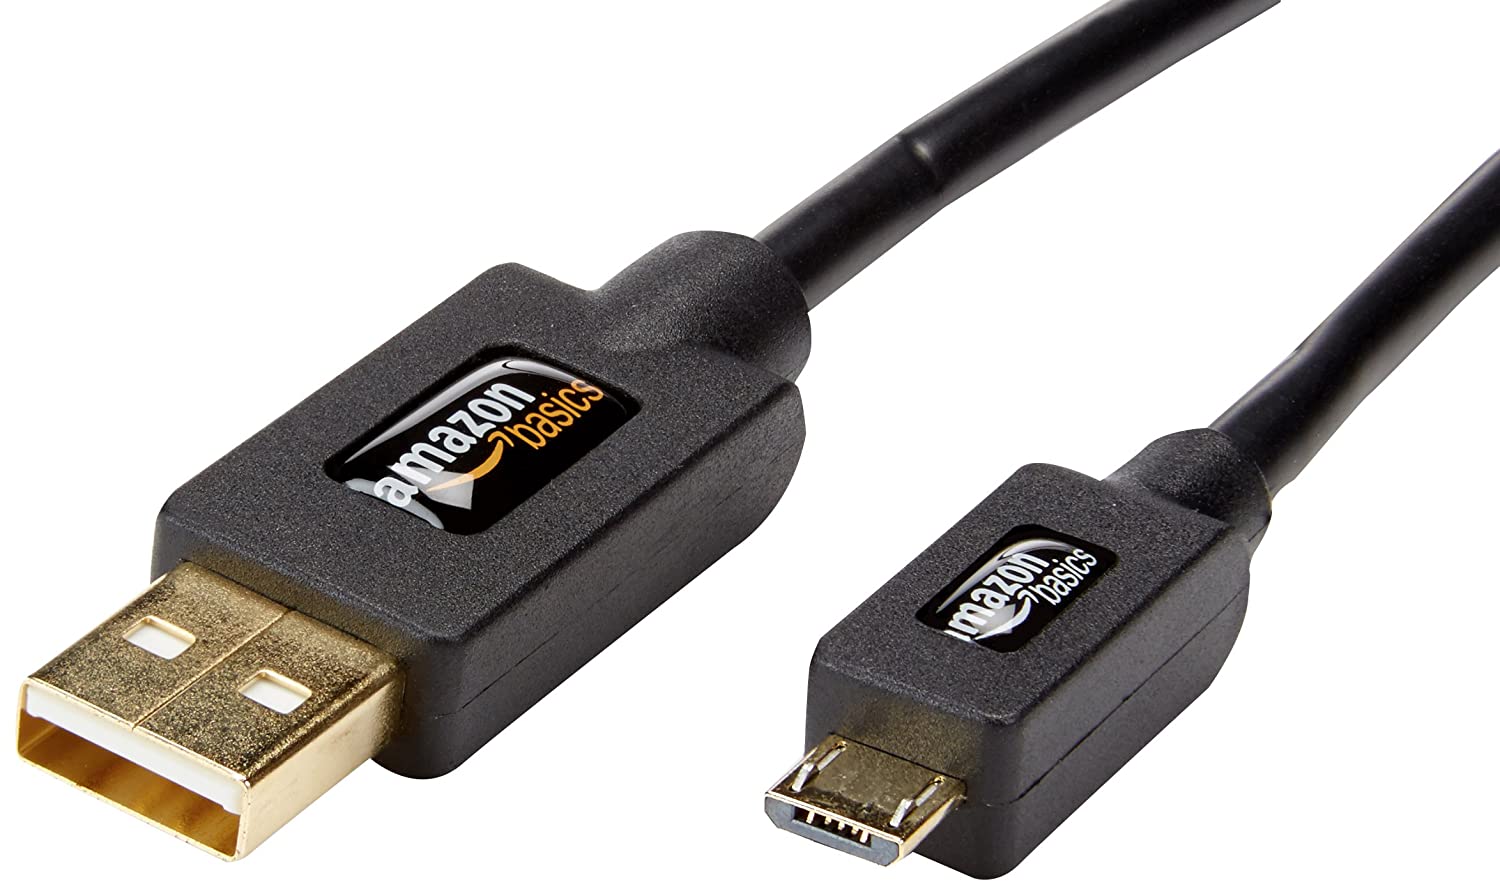 Basics USB-A to Micro USB Fast Charging Cable, 480Mbps Transfer  Speed with Gold-Plated Plugs, USB 2.0, 6 Foot, Black